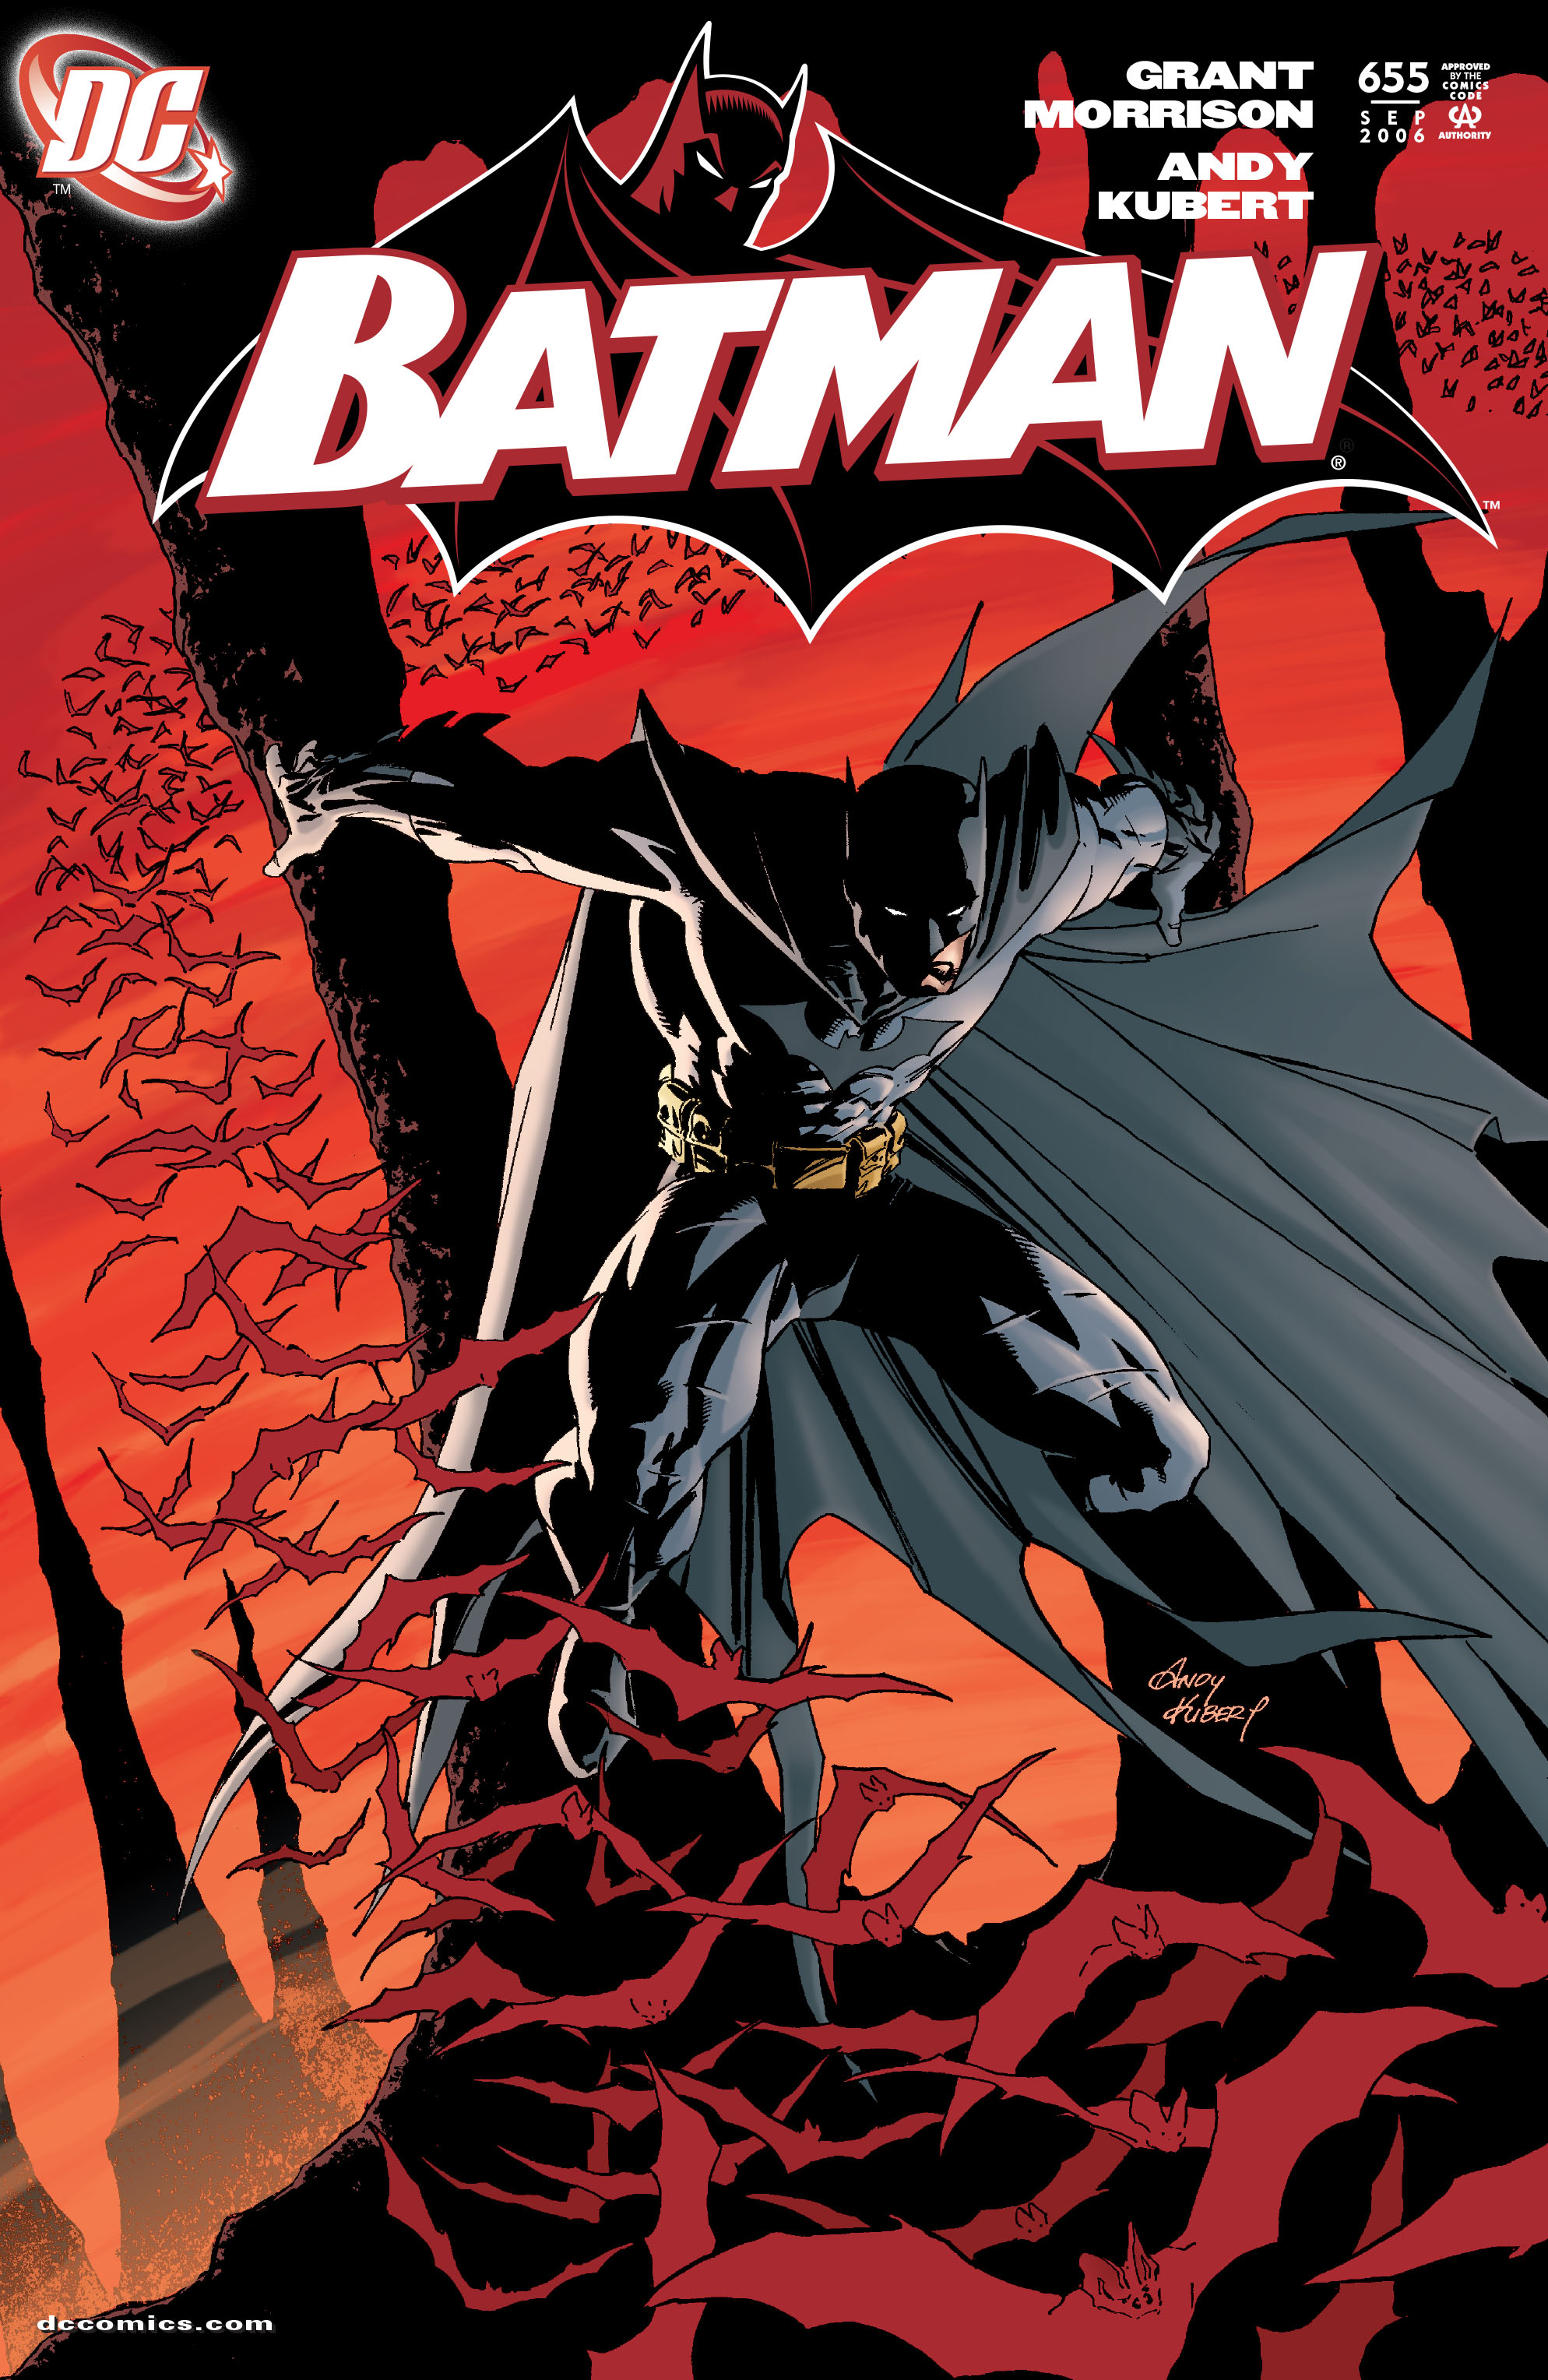 Batman 1940 Issue 655 | Read Batman 1940 Issue 655 comic online in high  quality. Read Full Comic online for free - Read comics online in high  quality .| READ COMIC ONLINE